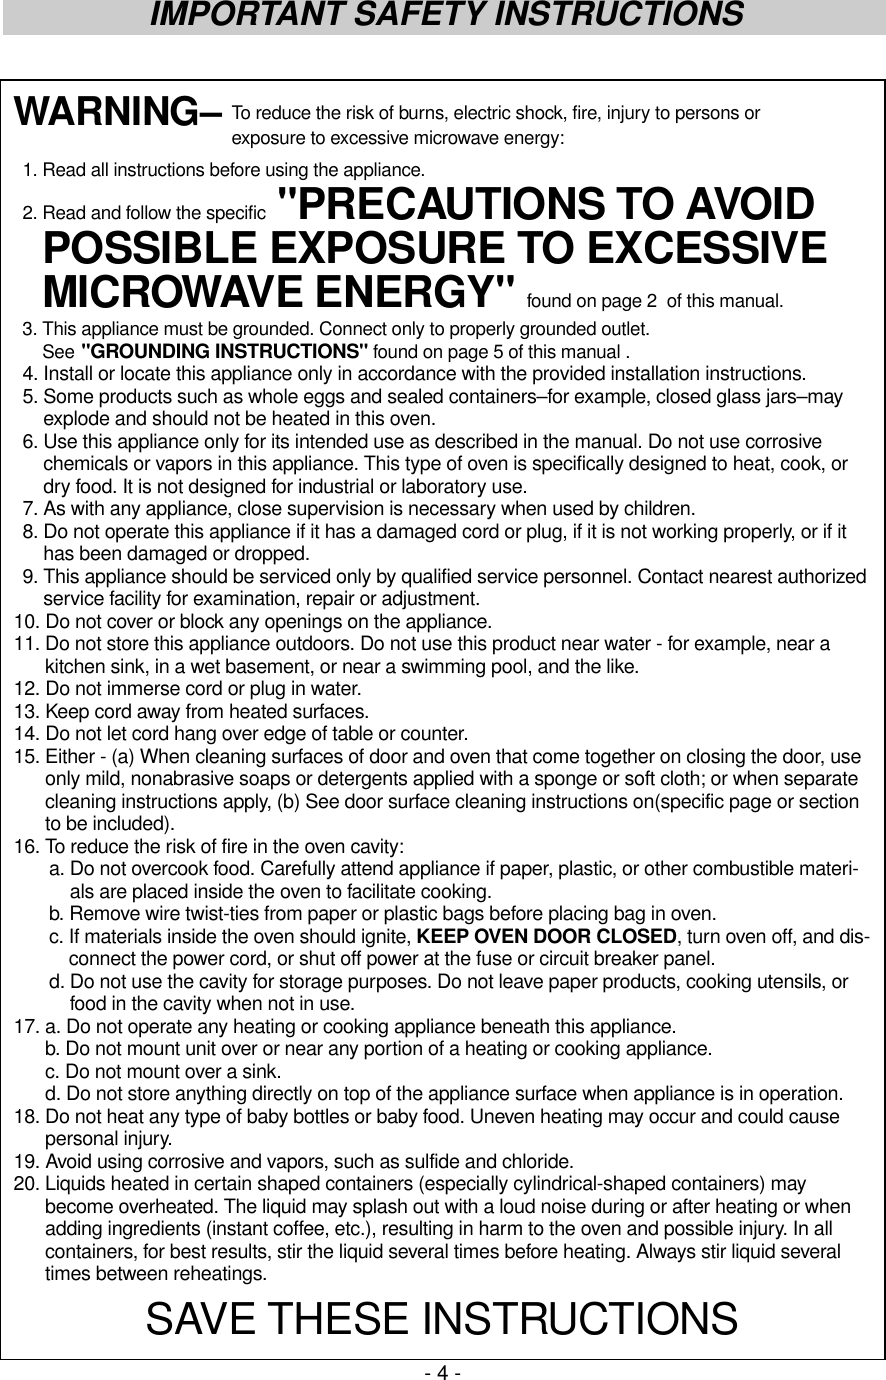 - 4 -IMPORTANT SAFETY INSTRUCTIONSWARNING– To reduce the risk of burns, electric shock, fire, injury to persons or exposure to excessive microwave energy:1. Read all instructions before using the appliance.2. Read and follow the specific &quot;PRECAUTIONS TO AVOIDPOSSIBLE EXPOSURE TO EXCESSIVEMICROWAVE ENERGY&quot; found on page 2  of this manual.3. This appliance must be grounded. Connect only to properly grounded outlet.See &quot;GROUNDING INSTRUCTIONS&quot; found on page 5 of this manual .4. Install or locate this appliance only in accordance with the provided installation instructions.5. Some products such as whole eggs and sealed containers–for example, closed glass jars–mayexplode and should not be heated in this oven.6. Use this appliance only for its intended use as described in the manual. Do not use corrosivechemicals or vapors in this appliance. This type of oven is specifically designed to heat, cook, ordry food. It is not designed for industrial or laboratory use.7. As with any appliance, close supervision is necessary when used by children.8. Do not operate this appliance if it has a damaged cord or plug, if it is not working properly, or if ithas been damaged or dropped.9. This appliance should be serviced only by qualified service personnel. Contact nearest authorizedservice facility for examination, repair or adjustment.10. Do not cover or block any openings on the appliance.11. Do not store this appliance outdoors. Do not use this product near water - for example, near akitchen sink, in a wet basement, or near a swimming pool, and the like.12. Do not immerse cord or plug in water.13. Keep cord away from heated surfaces.14. Do not let cord hang over edge of table or counter.15. Either - (a) When cleaning surfaces of door and oven that come together on closing the door, useonly mild, nonabrasive soaps or detergents applied with a sponge or soft cloth; or when separatecleaning instructions apply, (b) See door surface cleaning instructions on(specific page or sectionto be included).16. To reduce the risk of fire in the oven cavity:a. Do not overcook food. Carefully attend appliance if paper, plastic, or other combustible materi-als are placed inside the oven to facilitate cooking.b. Remove wire twist-ties from paper or plastic bags before placing bag in oven.c. If materials inside the oven should ignite, KEEP OVEN DOOR CLOSED, turn oven off, and dis-connect the power cord, or shut off power at the fuse or circuit breaker panel.d. Do not use the cavity for storage purposes. Do not leave paper products, cooking utensils, orfood in the cavity when not in use.17. a. Do not operate any heating or cooking appliance beneath this appliance.b. Do not mount unit over or near any portion of a heating or cooking appliance.c. Do not mount over a sink.d. Do not store anything directly on top of the appliance surface when appliance is in operation.18. Do not heat any type of baby bottles or baby food. Uneven heating may occur and could causepersonal injury.19. Avoid using corrosive and vapors, such as sulfide and chloride.20. Liquids heated in certain shaped containers (especially cylindrical-shaped containers) maybecome overheated. The liquid may splash out with a loud noise during or after heating or whenadding ingredients (instant coffee, etc.), resulting in harm to the oven and possible injury. In allcontainers, for best results, stir the liquid several times before heating. Always stir liquid severaltimes between reheatings.SAVE THESE INSTRUCTIONS